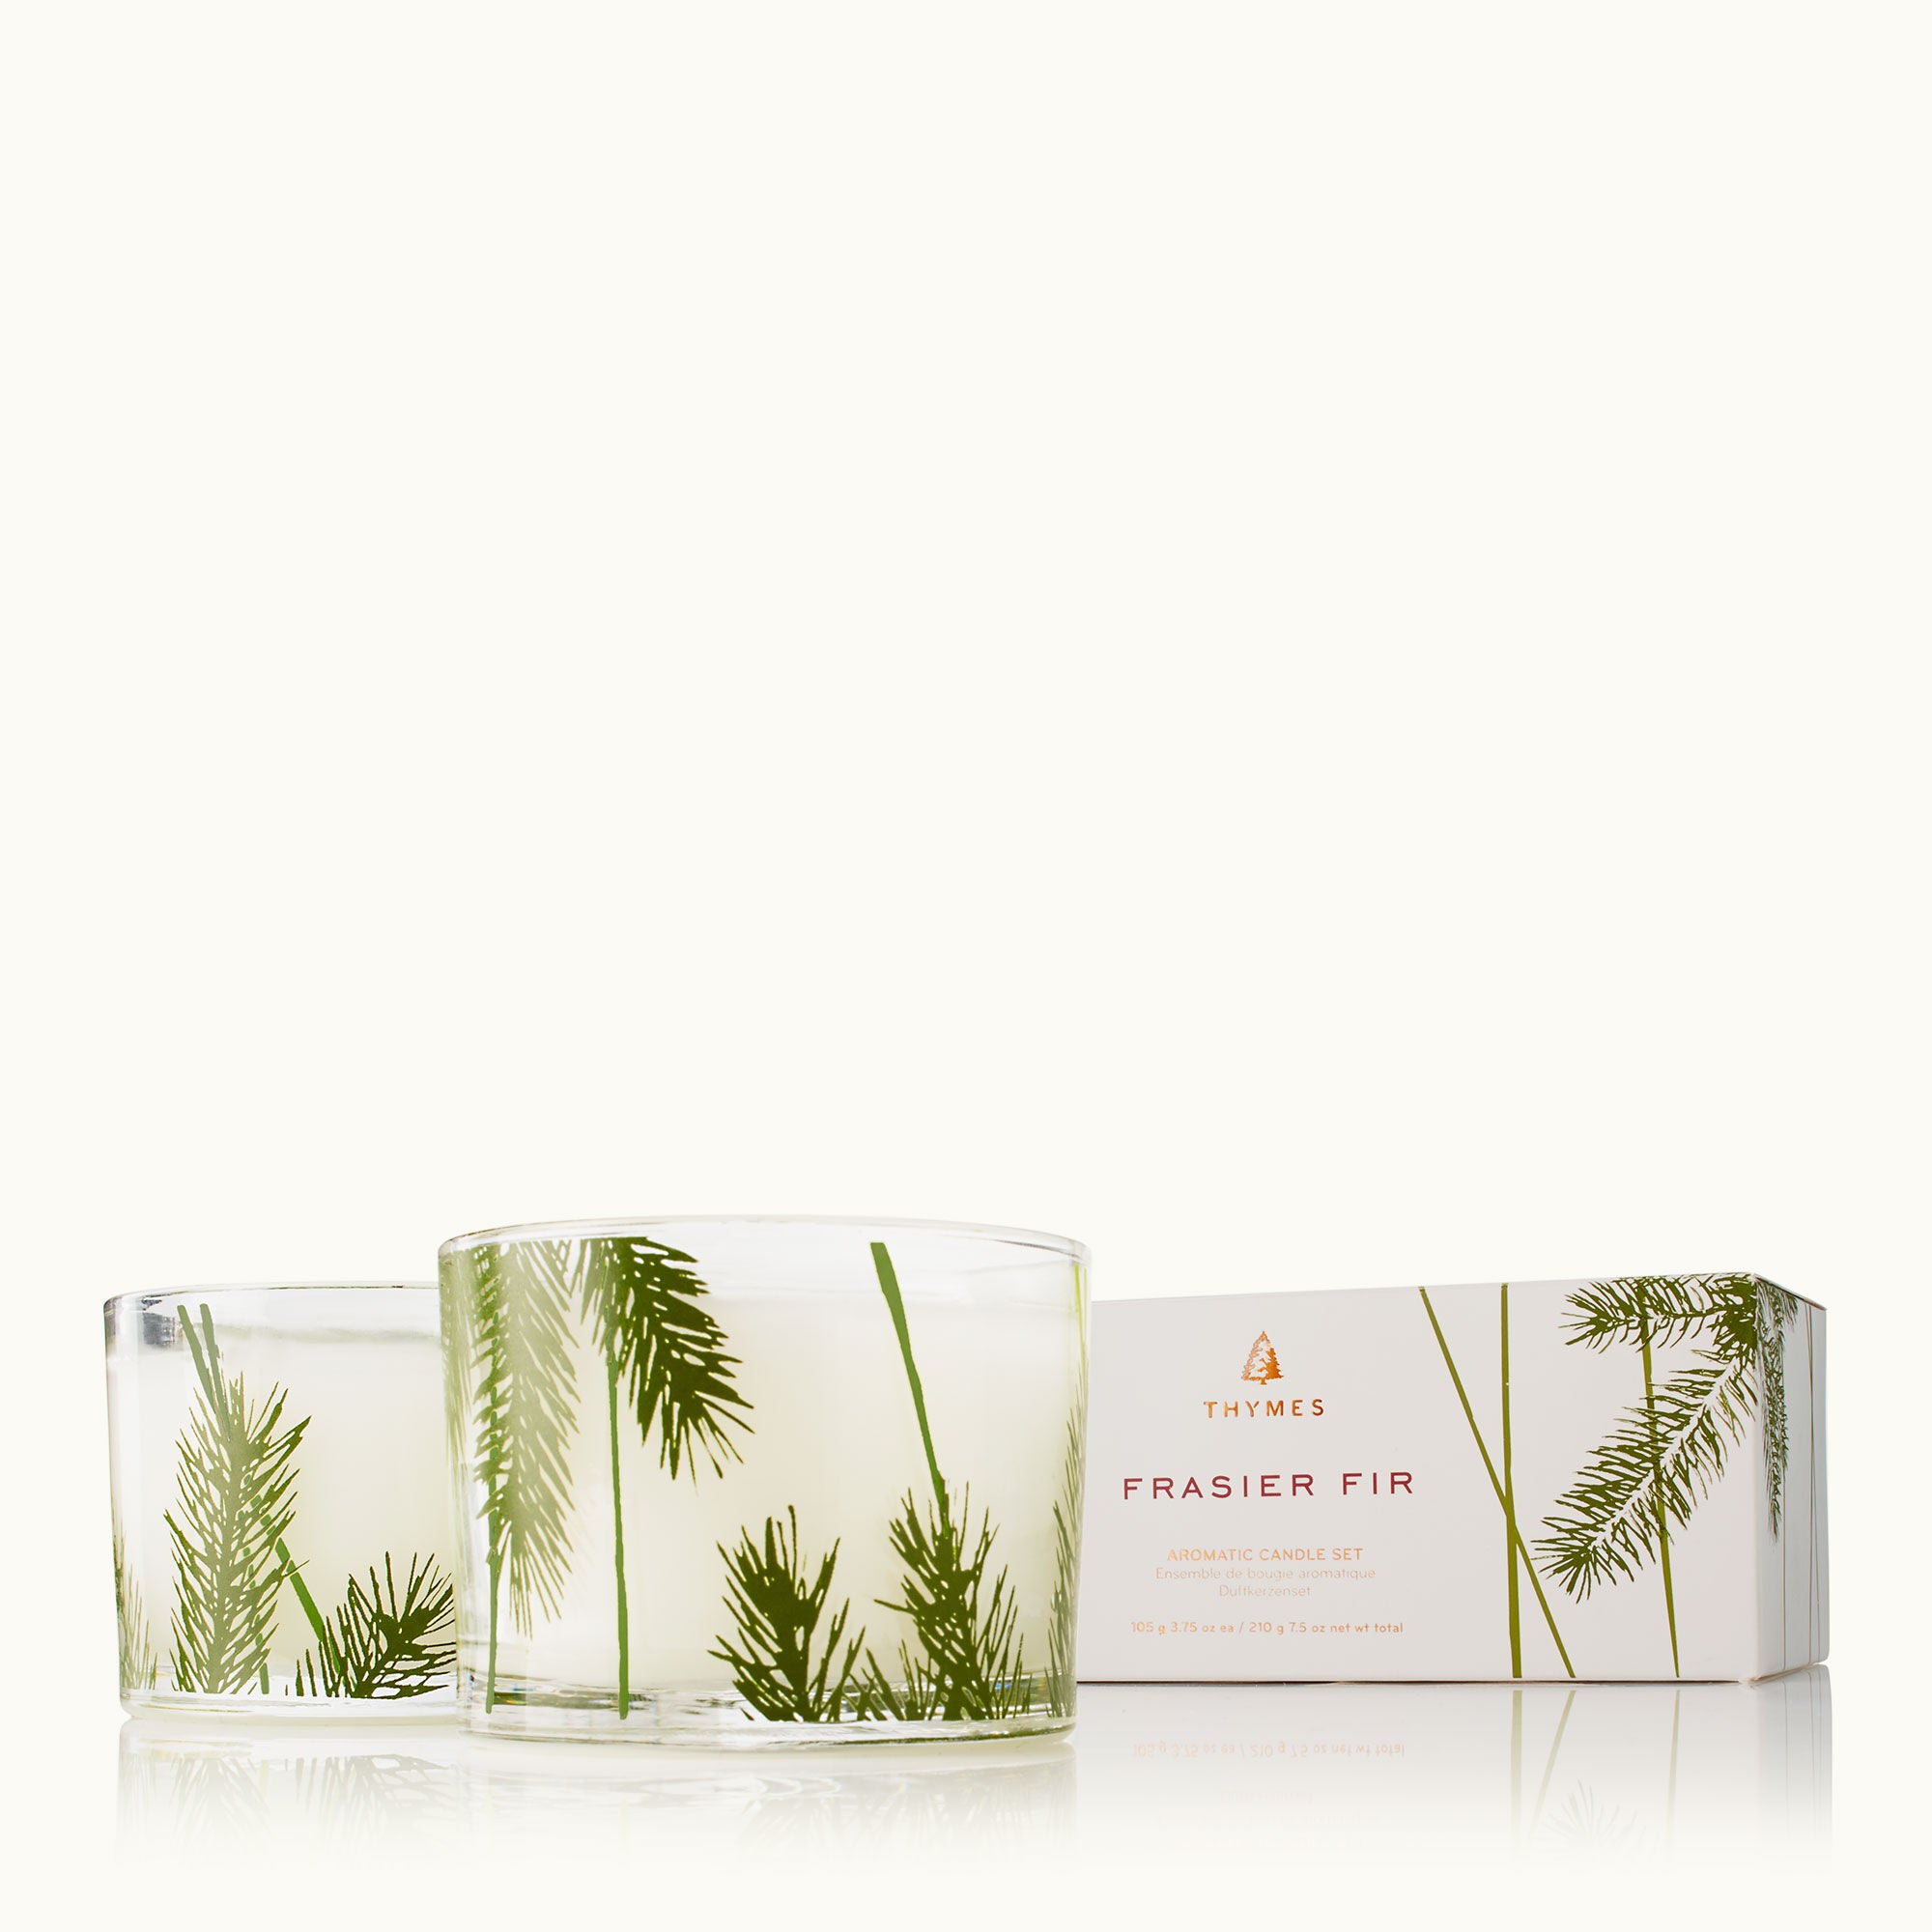 Thymes Frasier Fir Poured Candle Set - Pine Needle